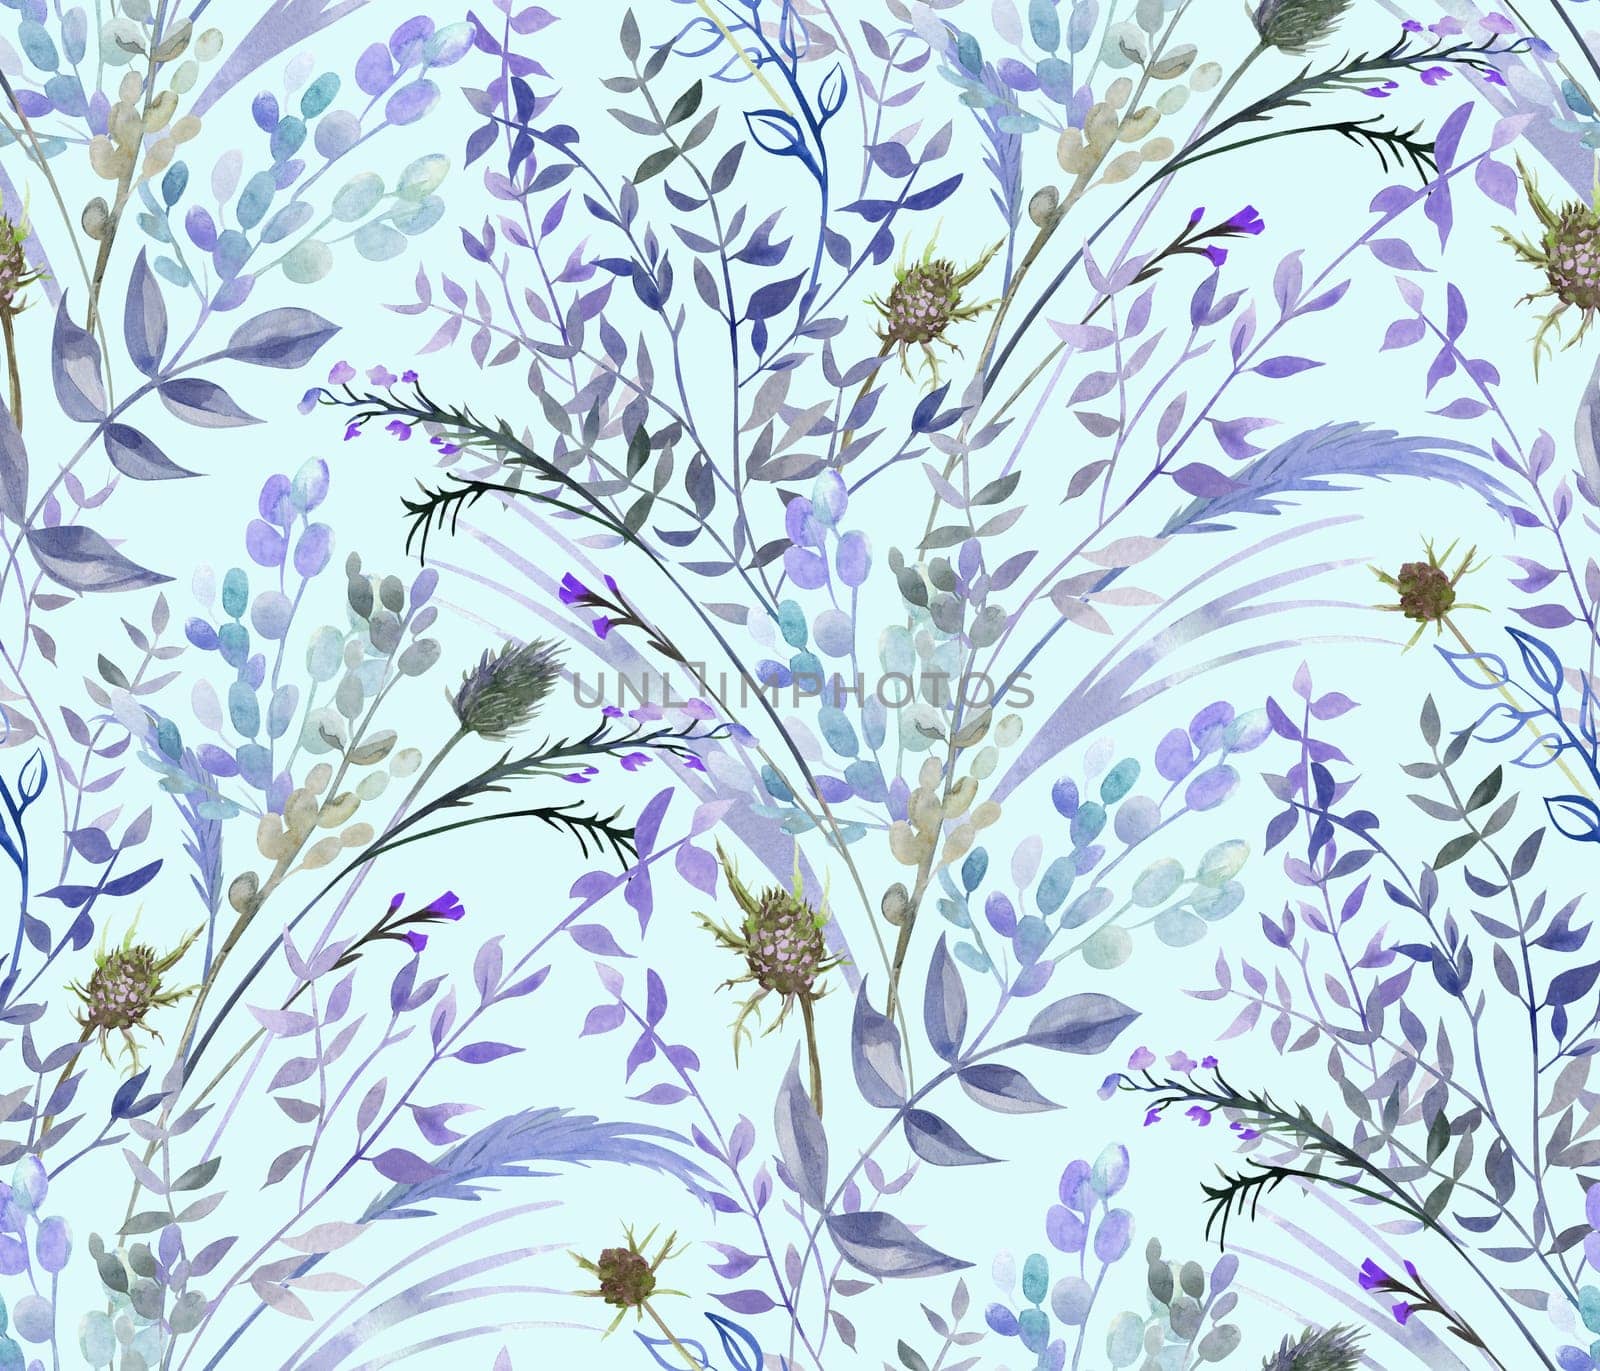 Seamless watercolor pattern with boho style fern branches and leaves drawn for summer clothes